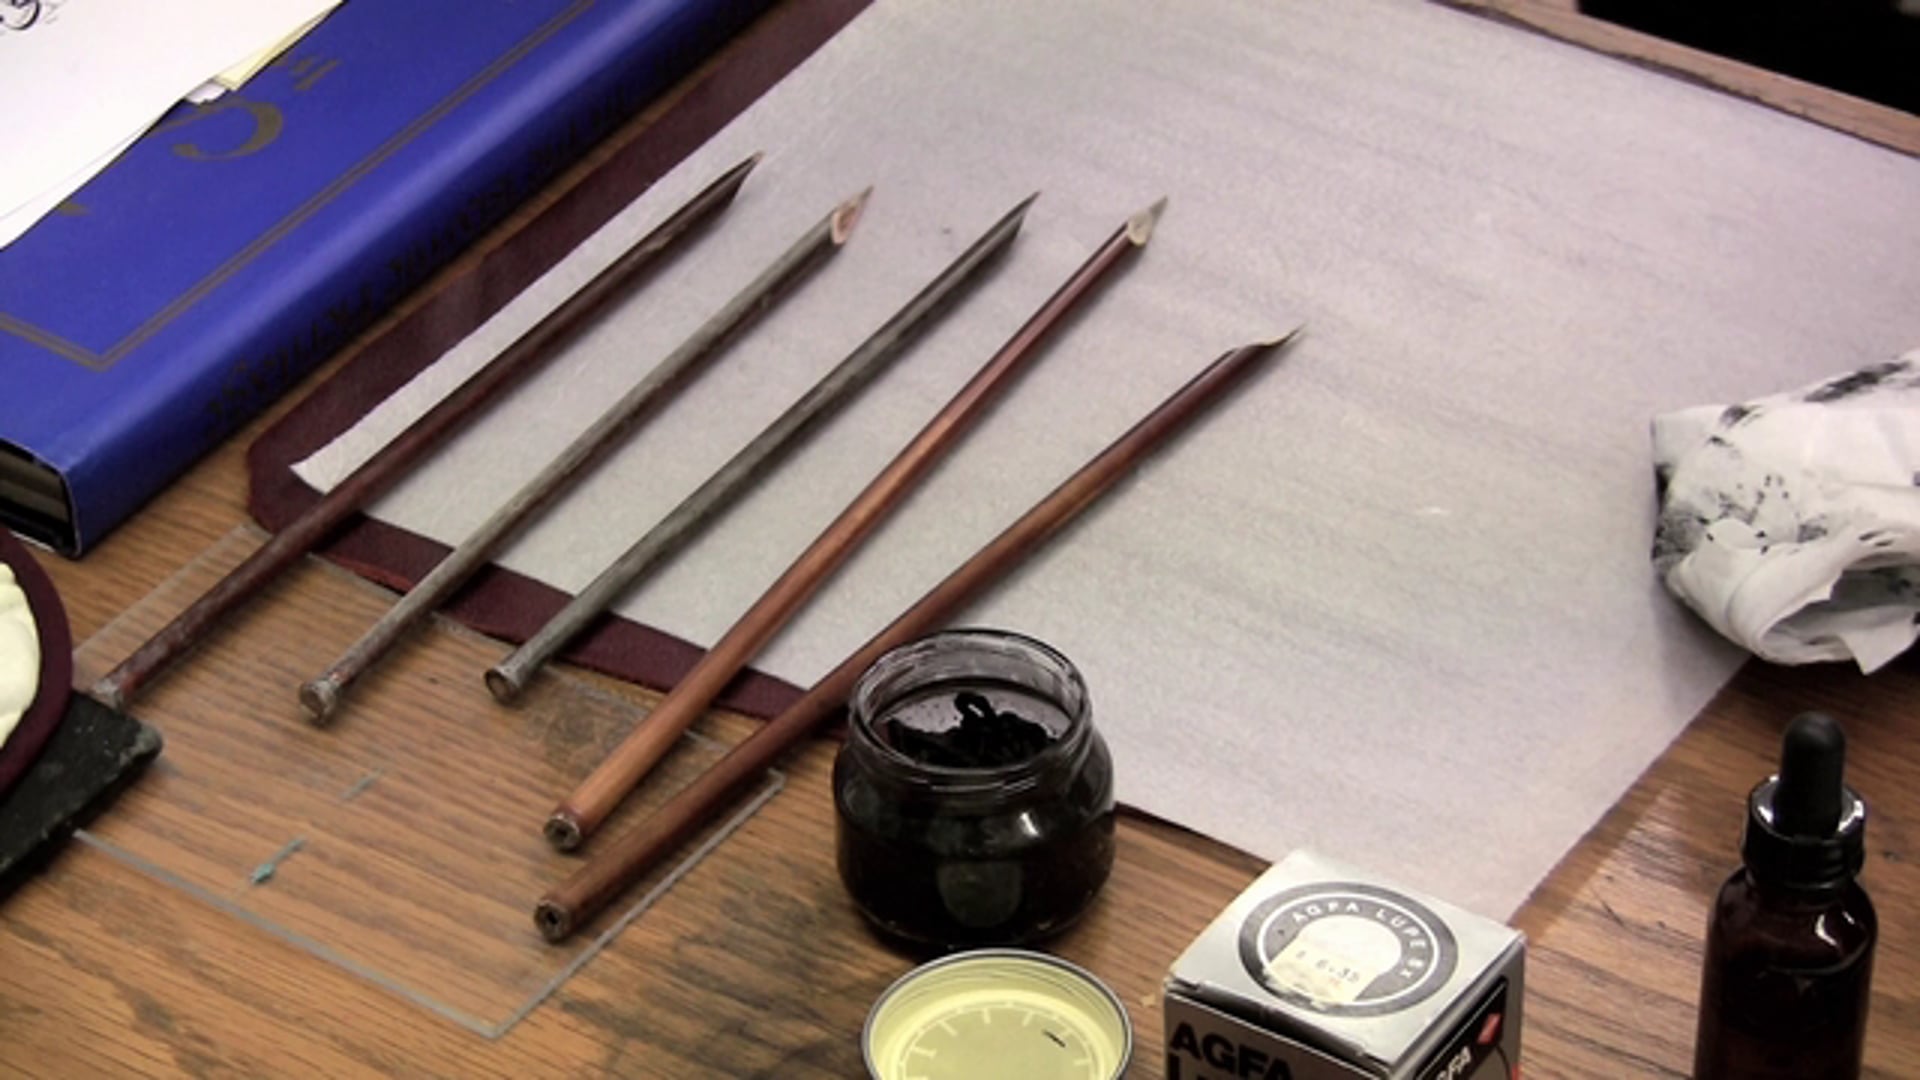 Tools used for Arabic script calligraphy